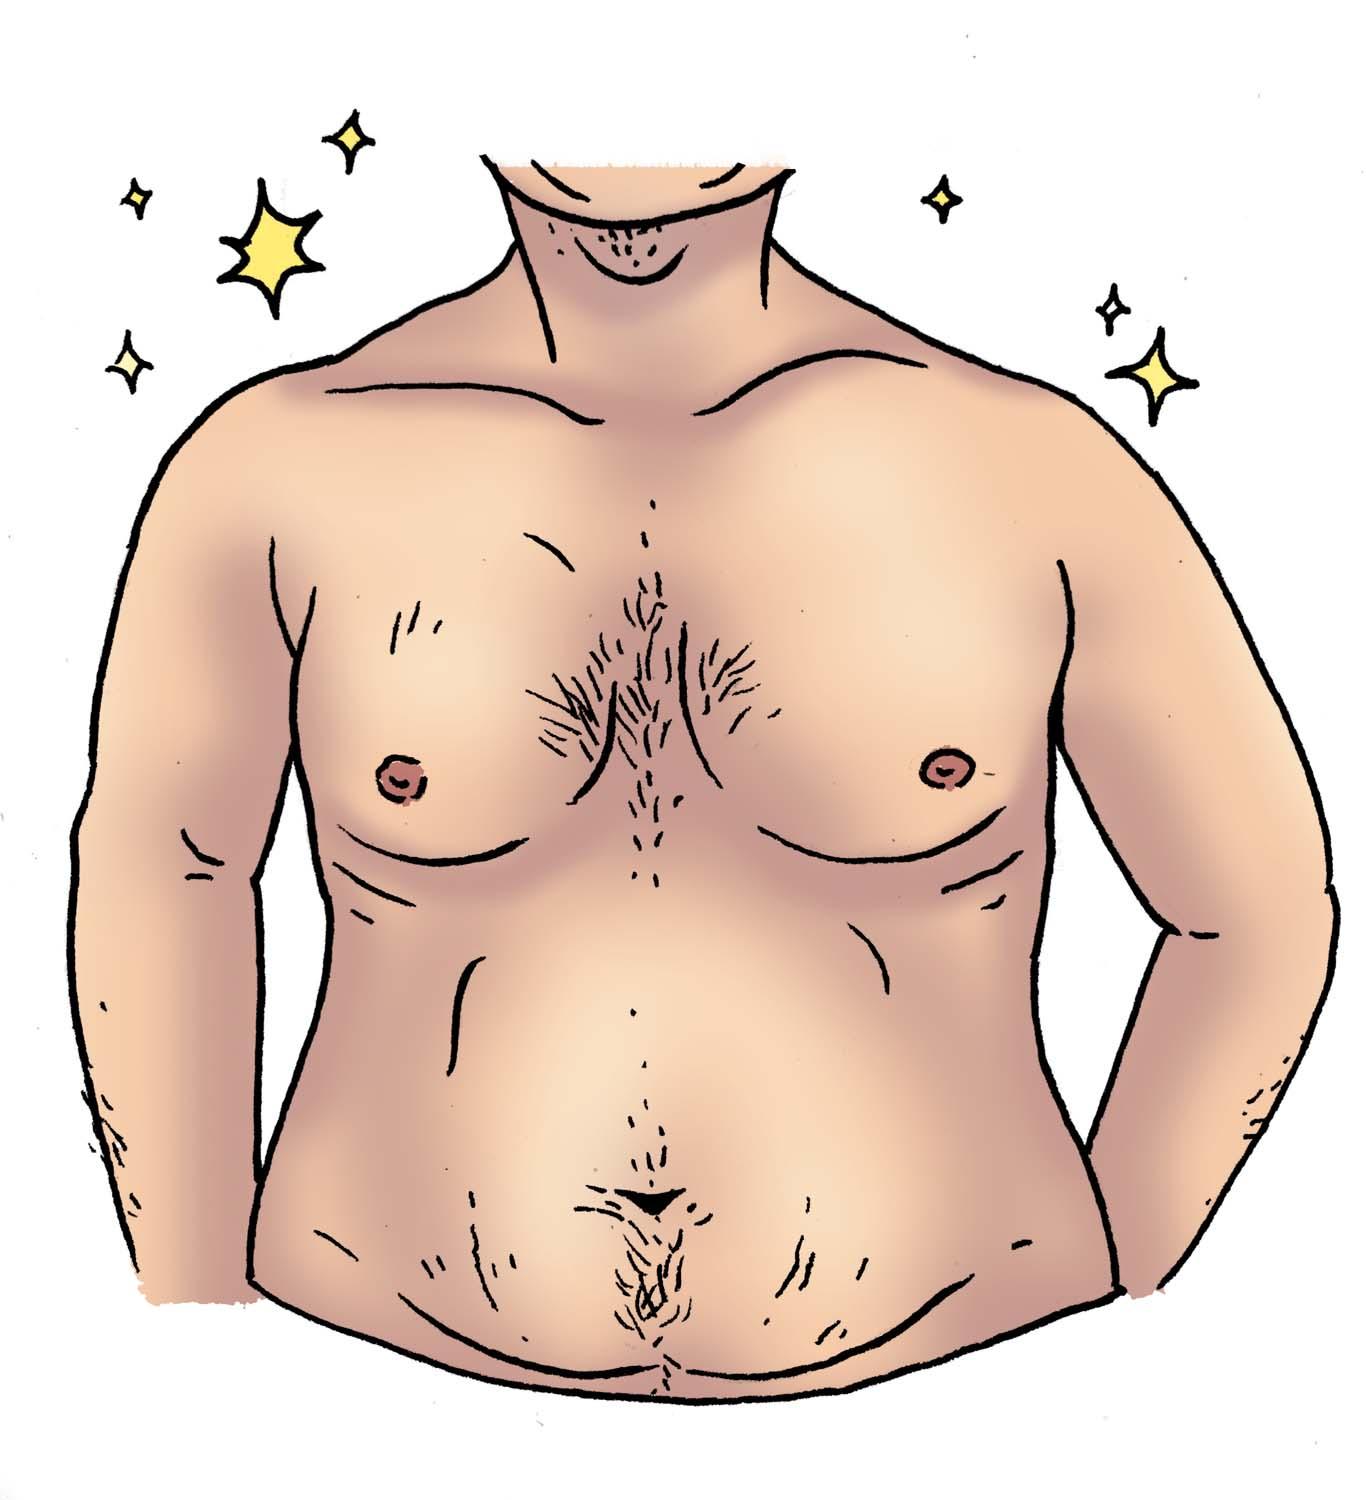 Opinion  More male representation needed in body positivity movement - The  Pitt News